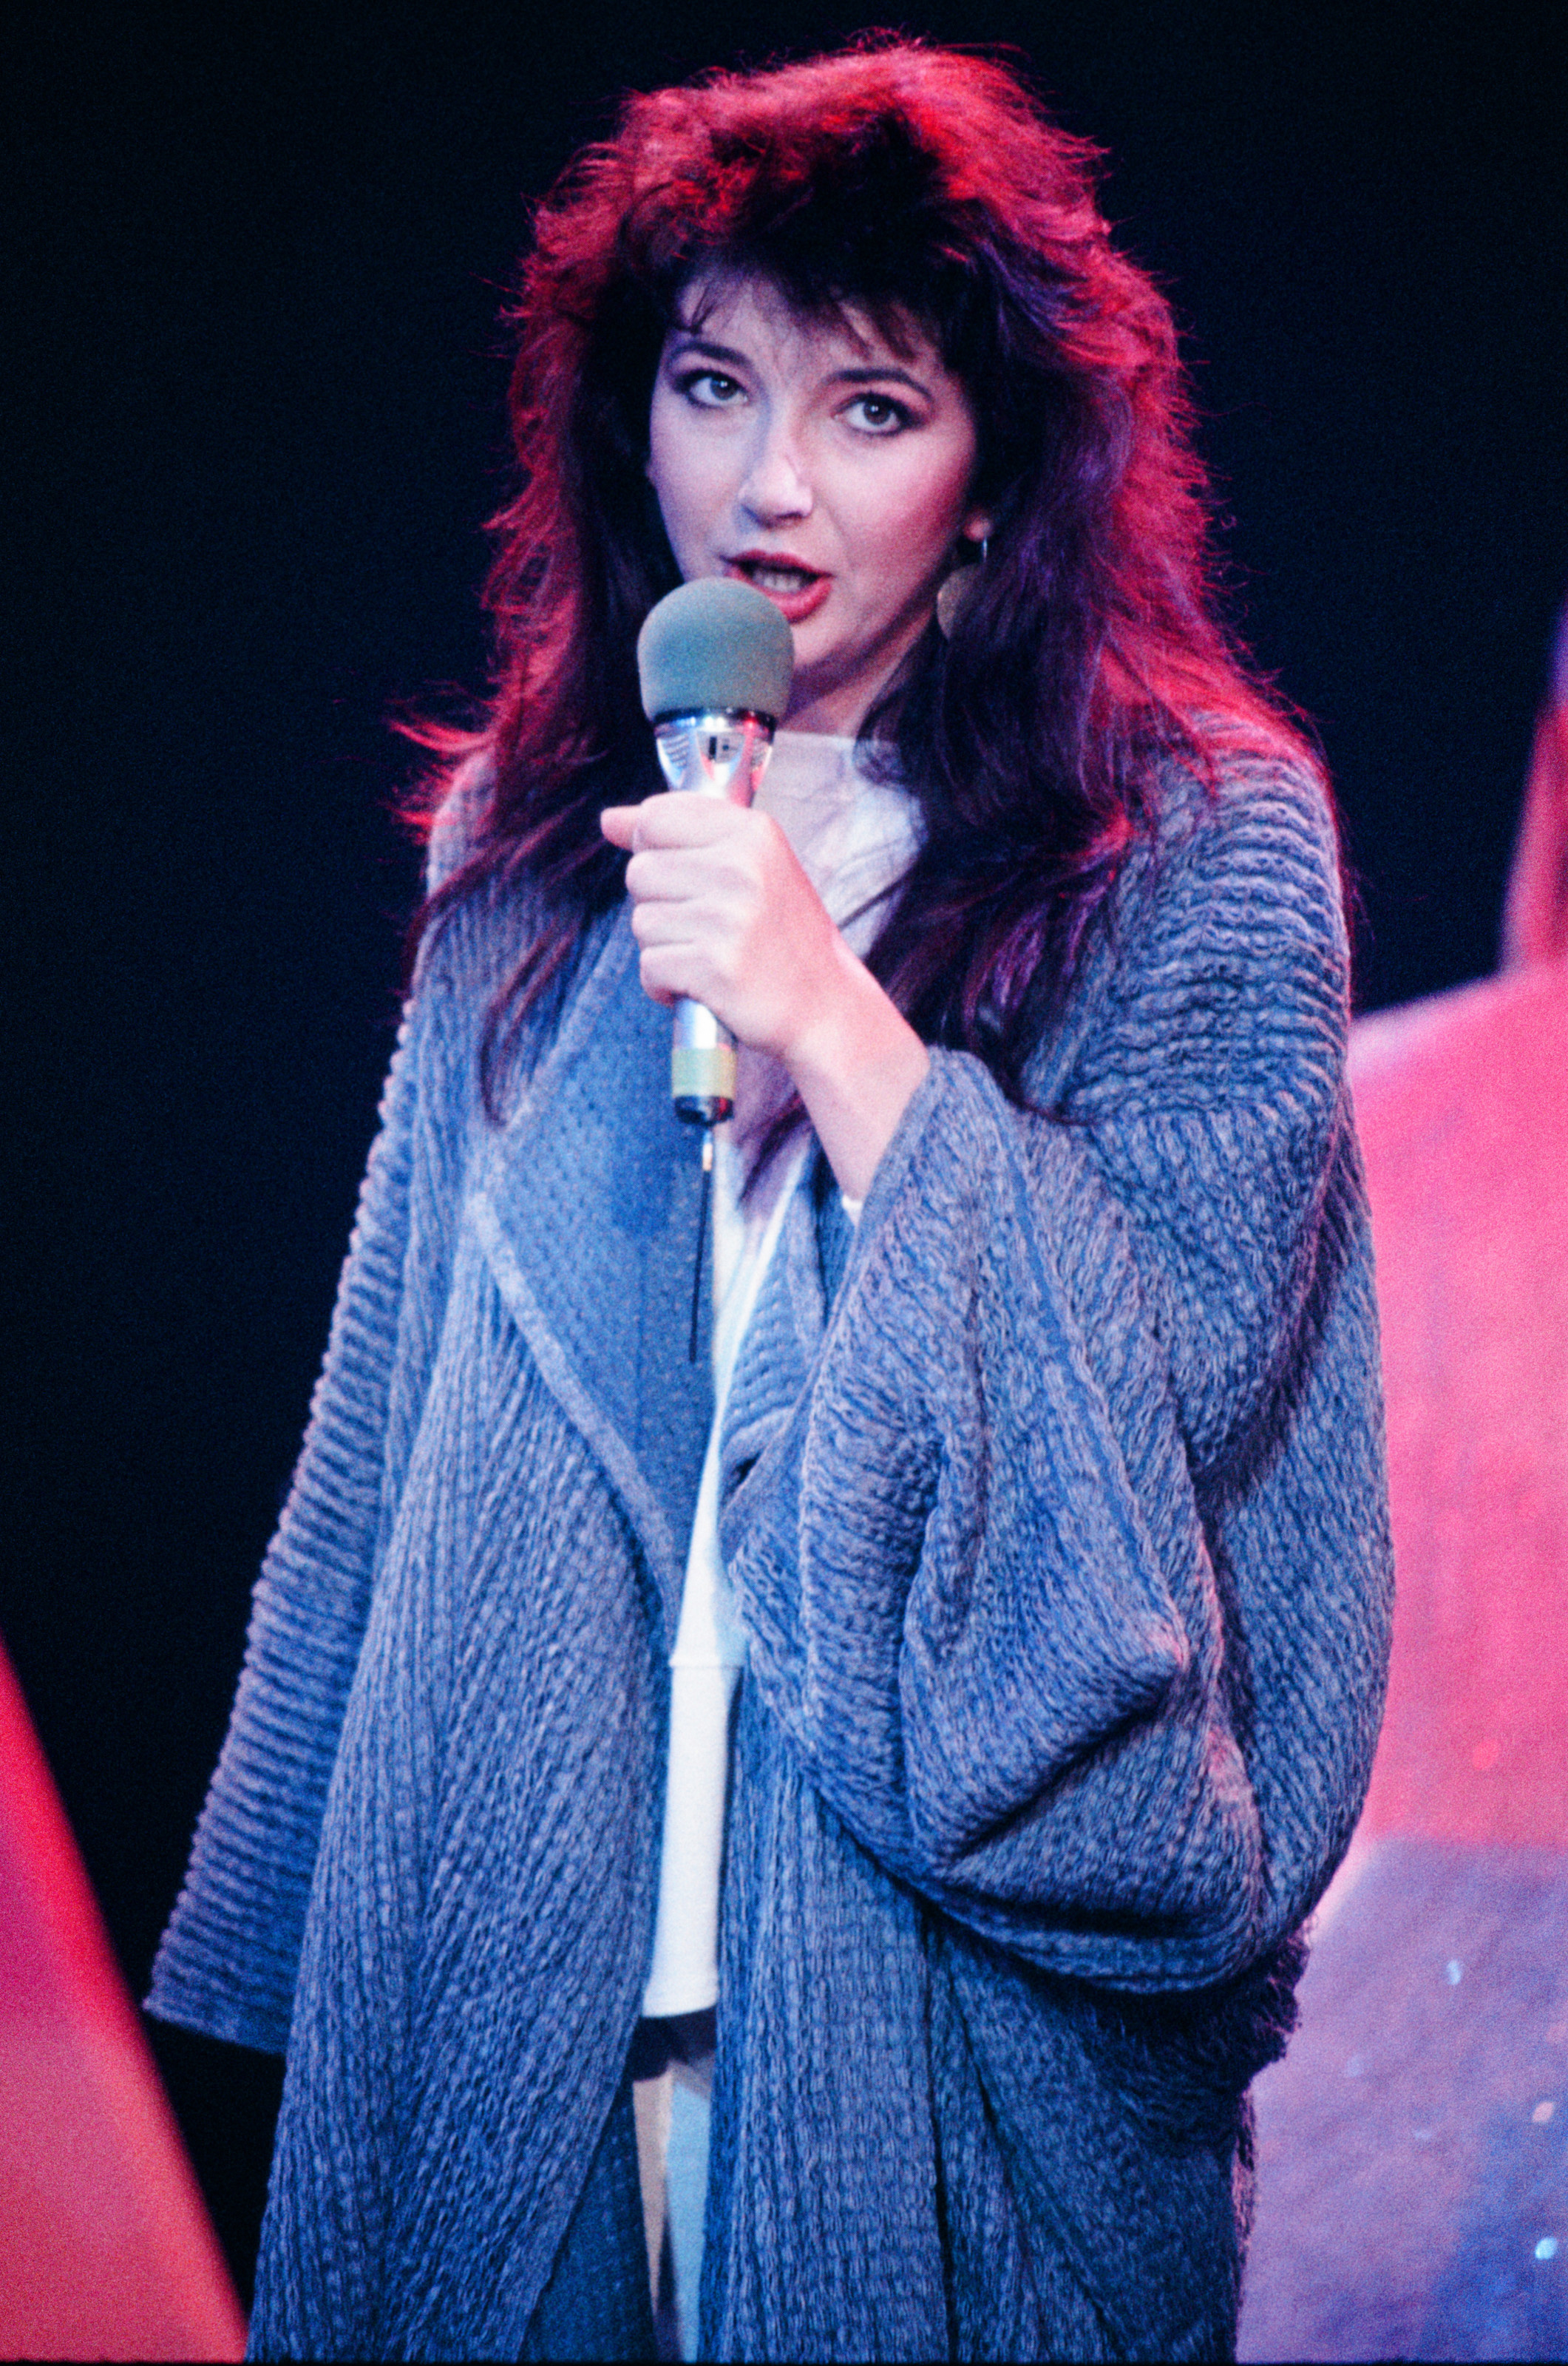 Kate singing into a microphone and wearing a loose coat